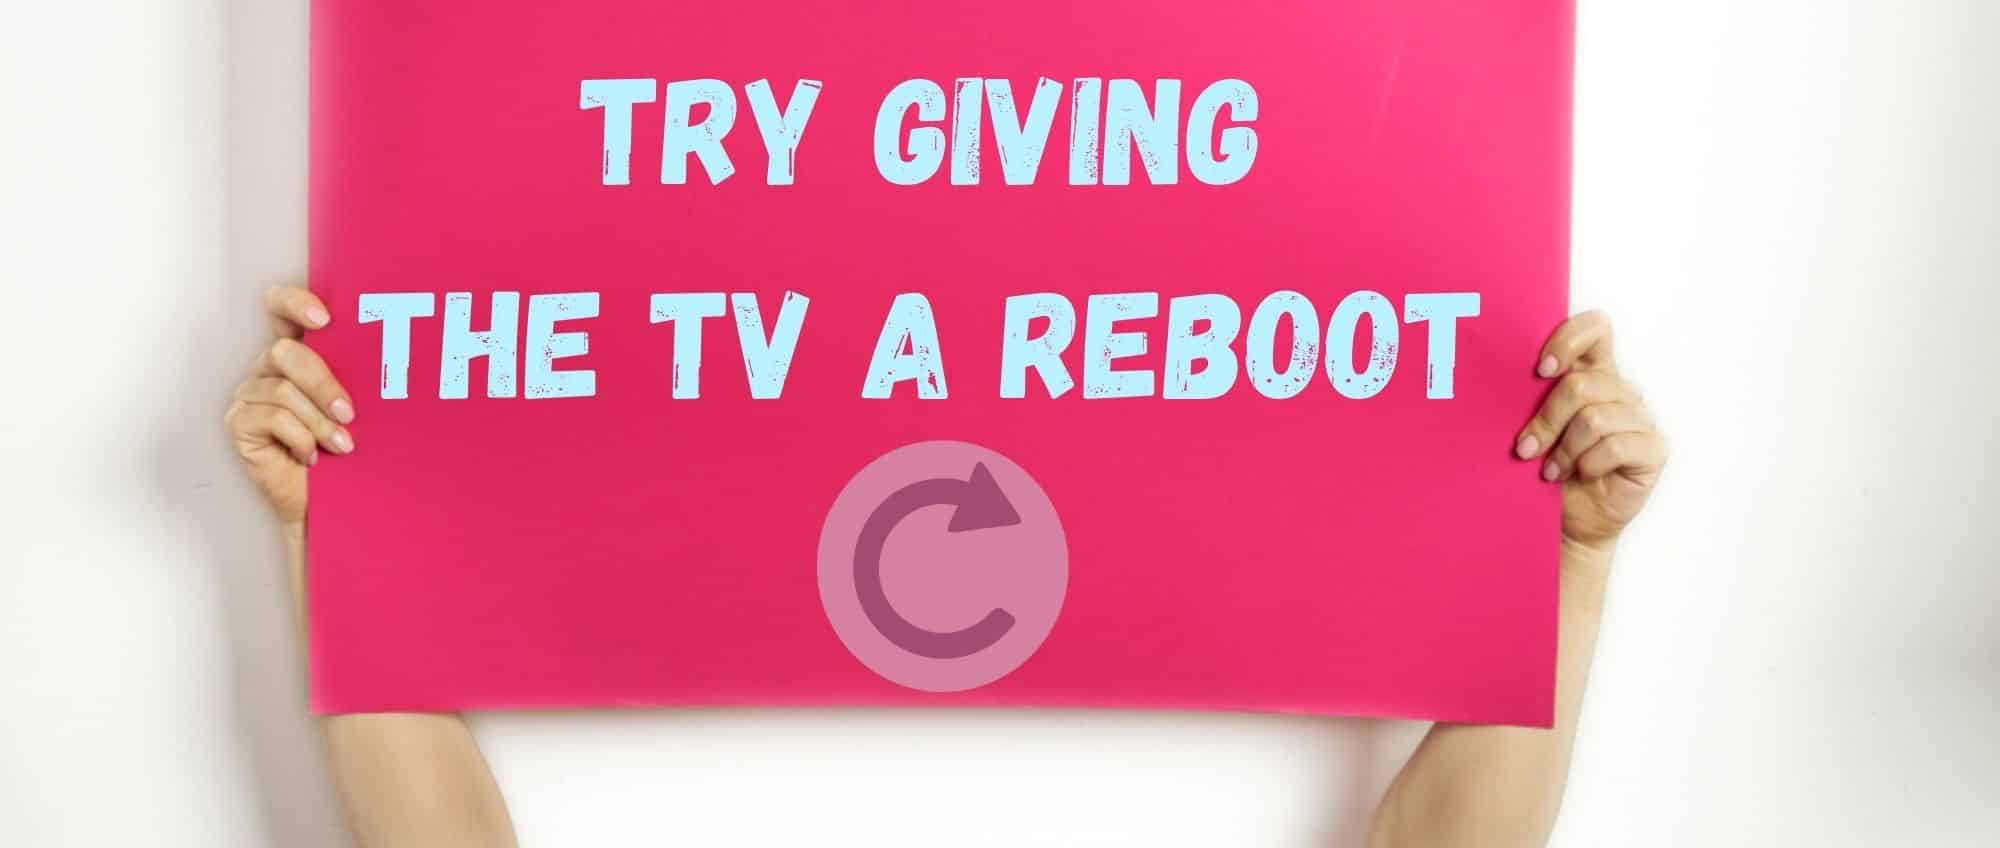 Try giving the TV a reboot 